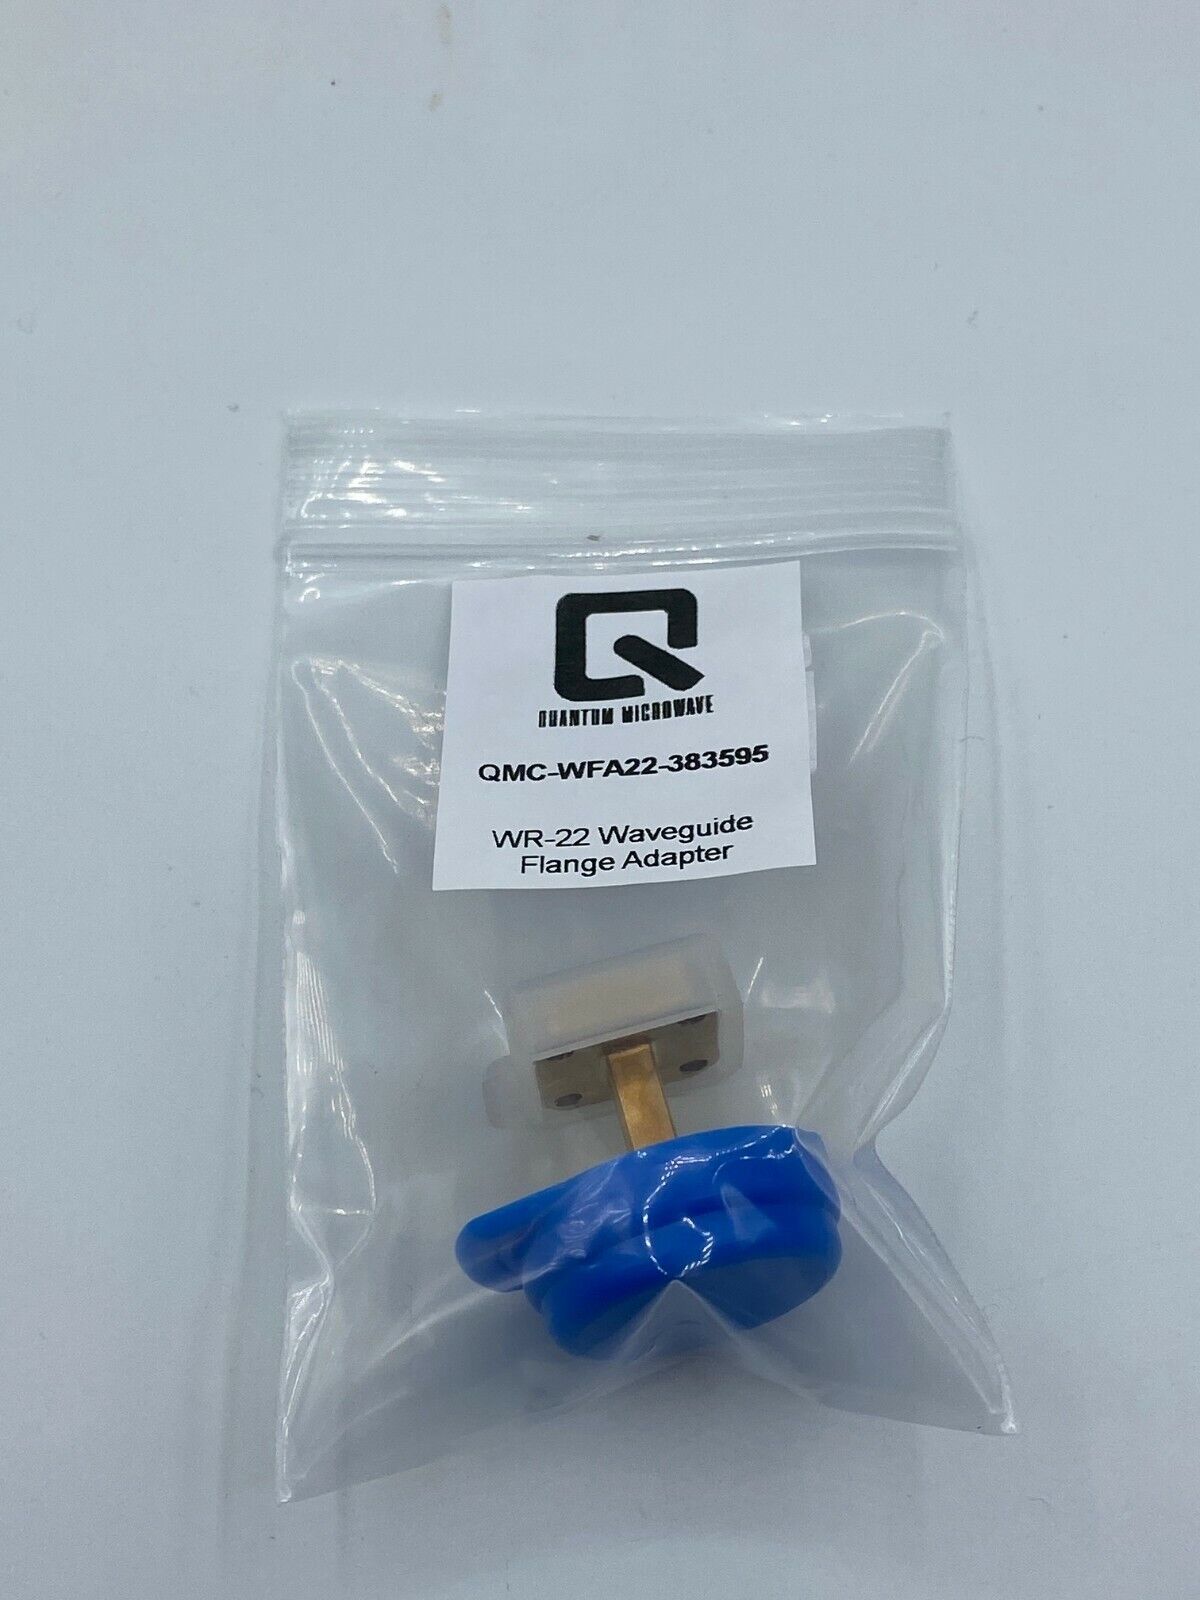 Wr-22 Waveguide Flange Adapter Gold Plated By Quantum Microwave